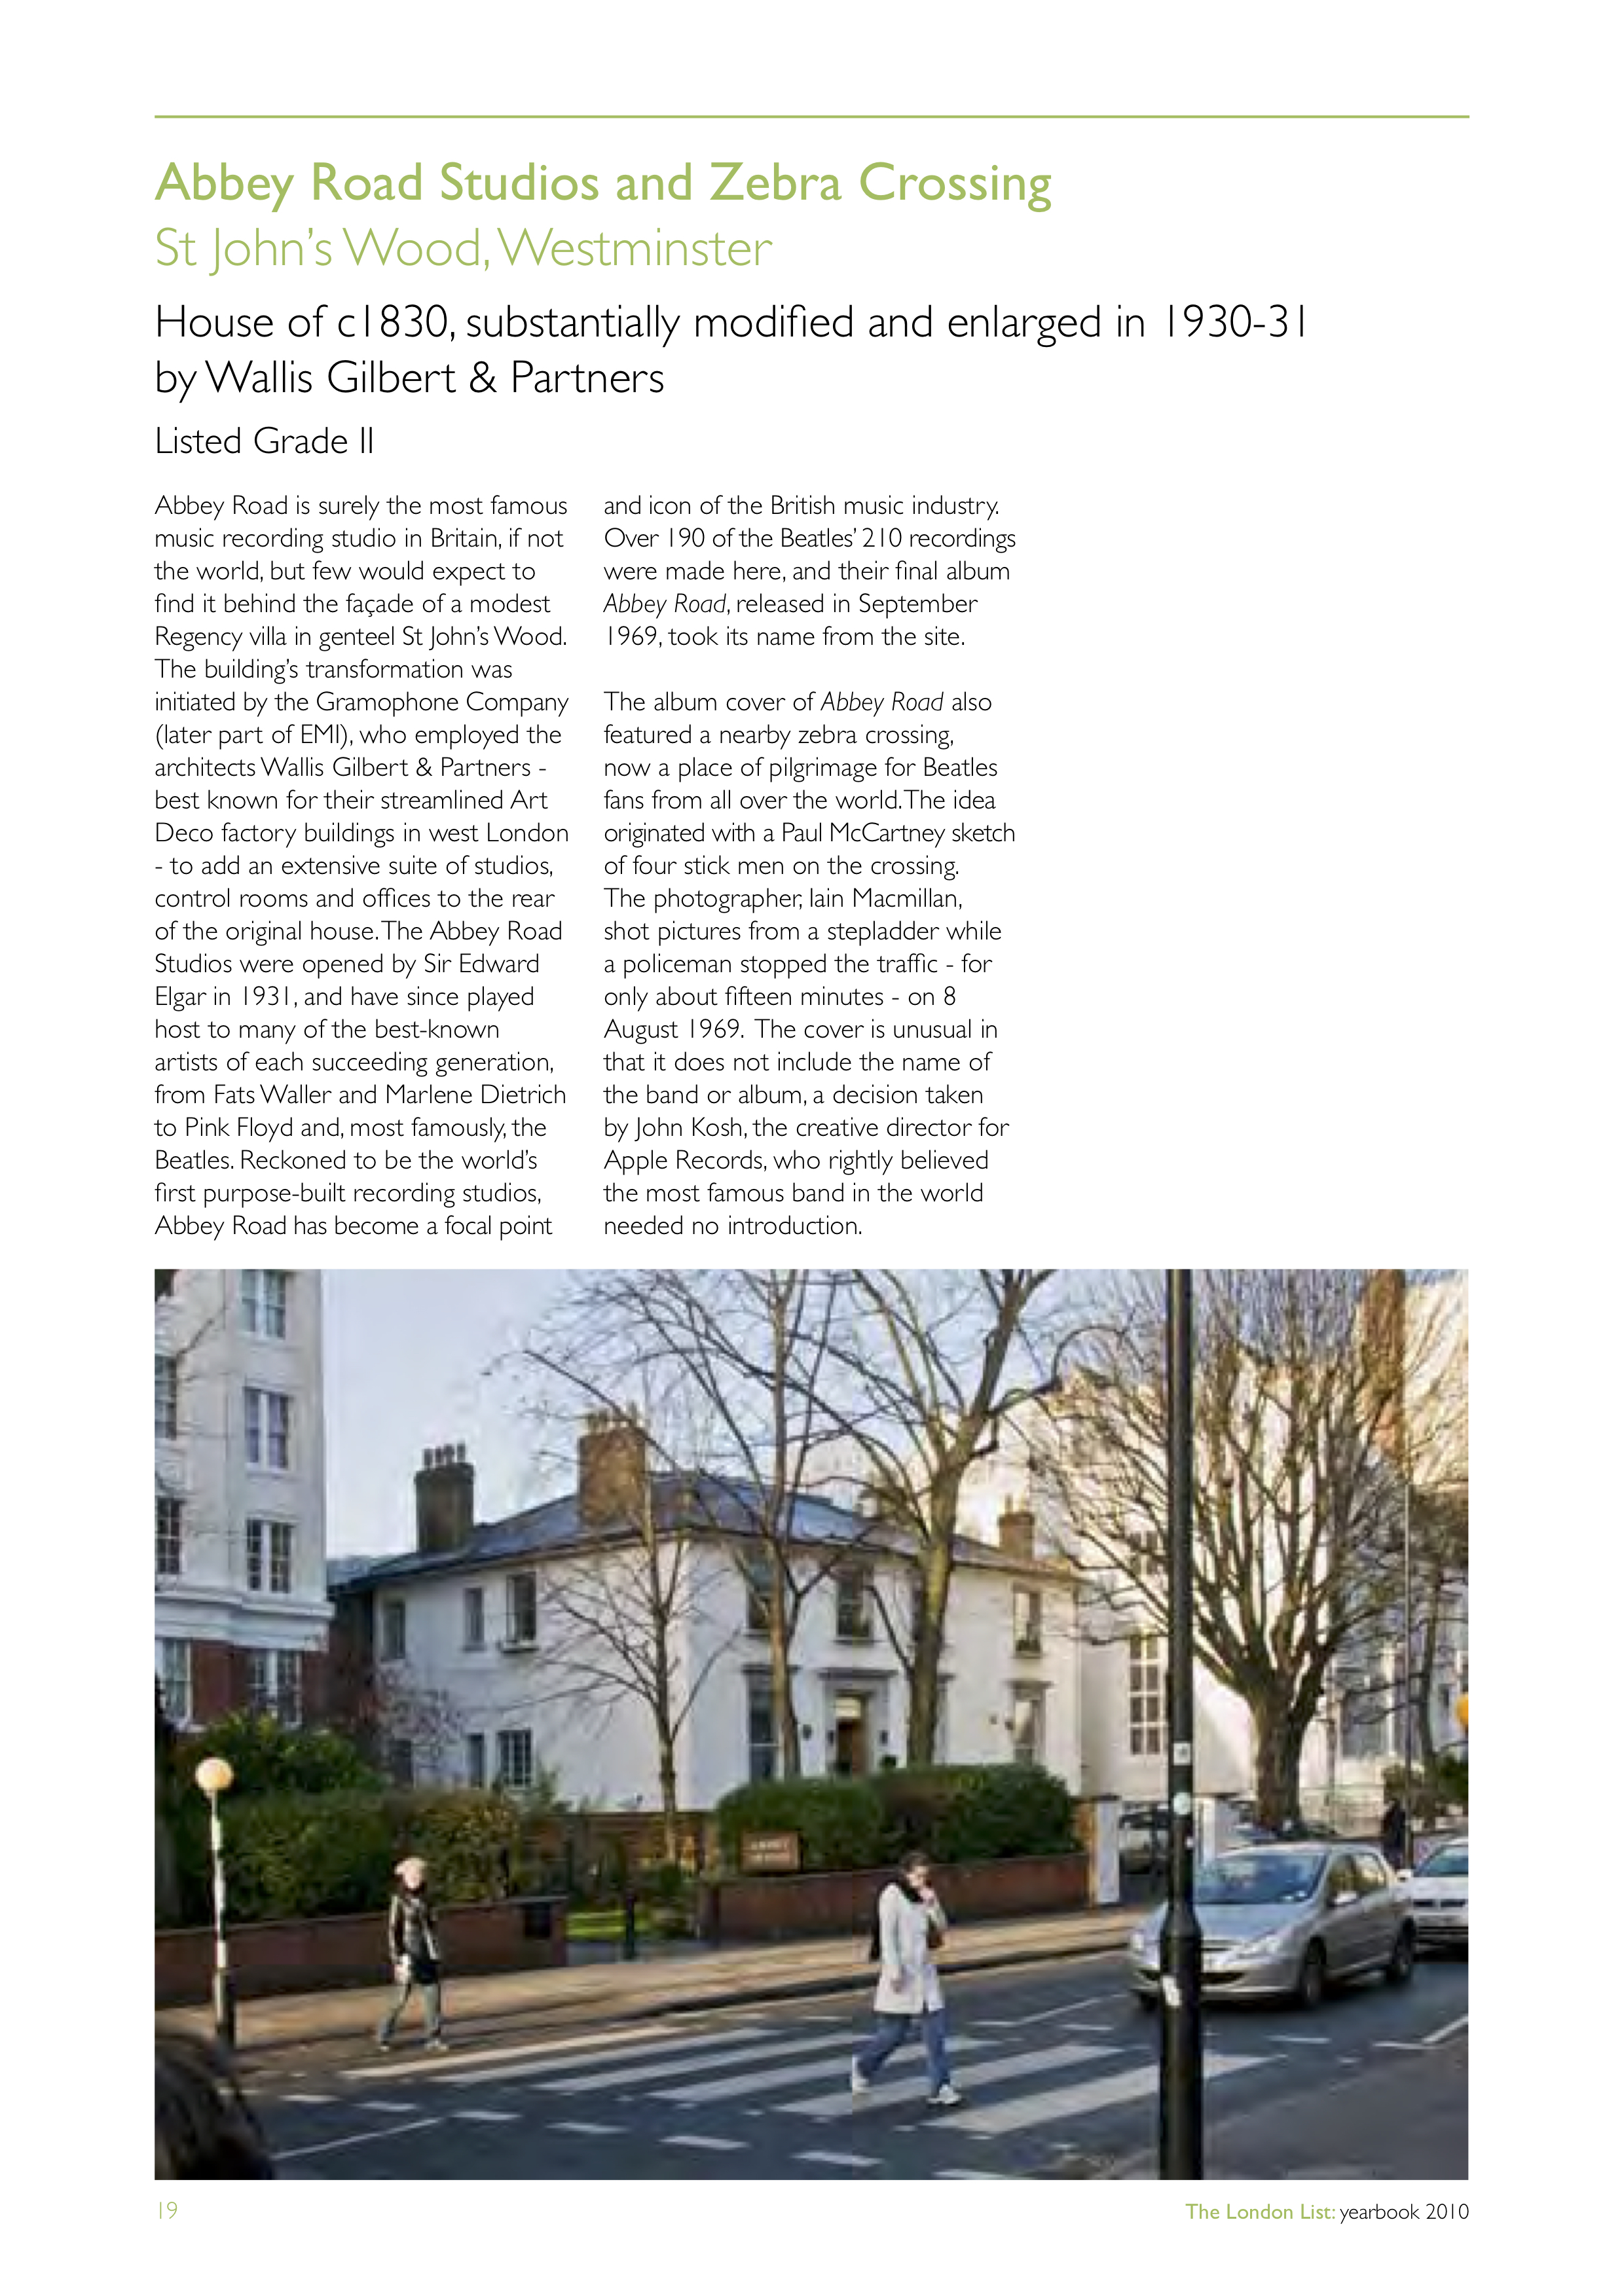 Abbey Road in 'The London List: Yearbook 2010'